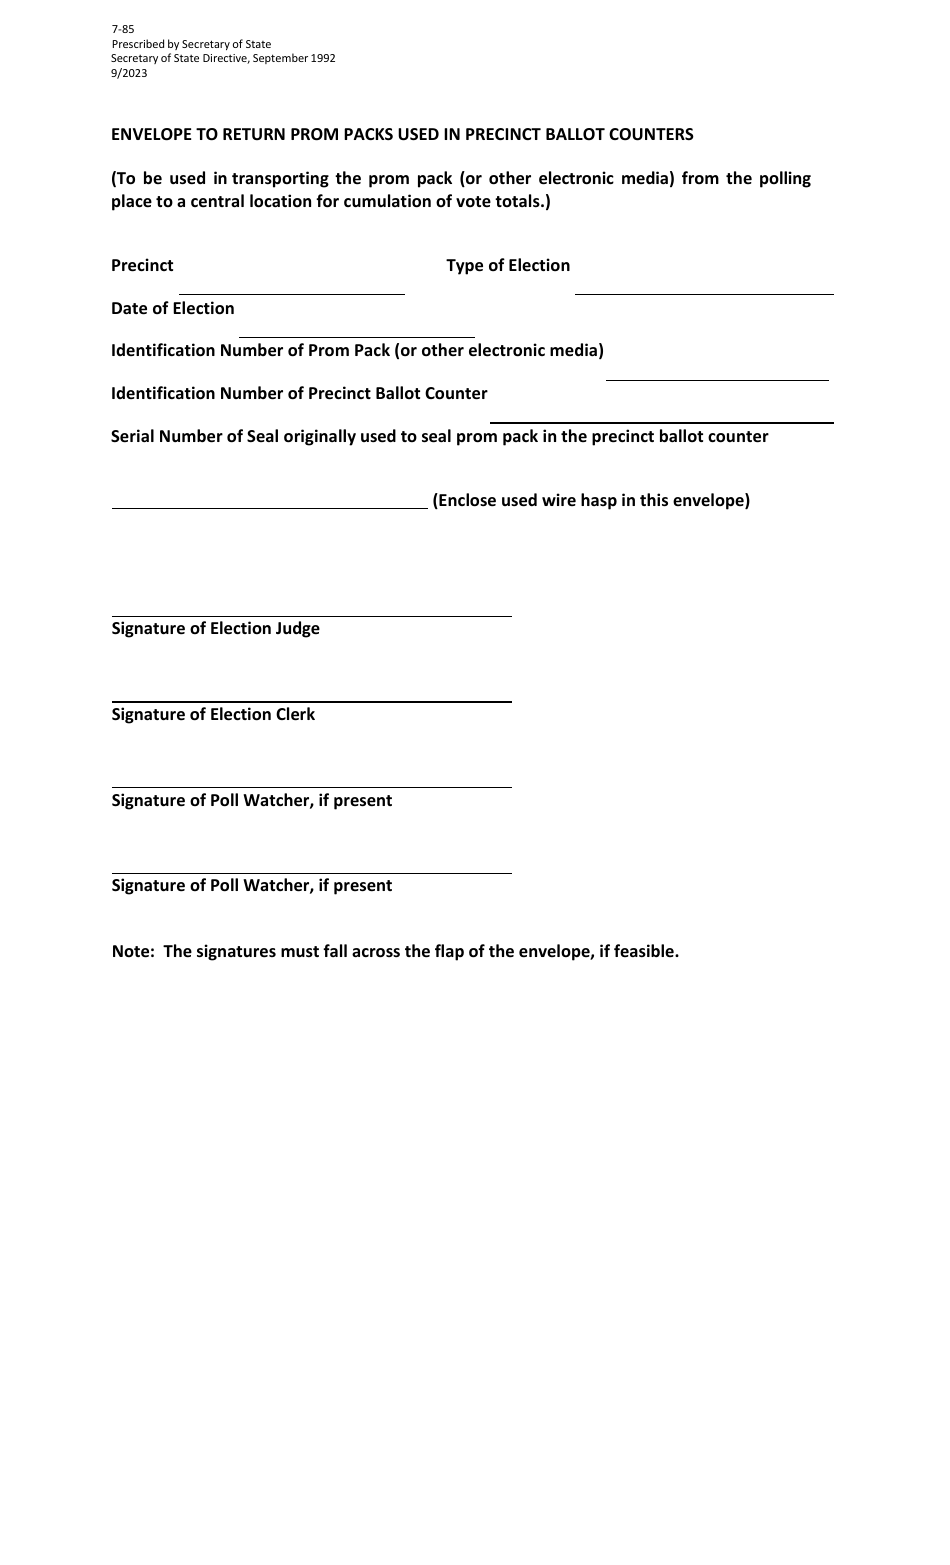 Form 7-85 Envelope to Return Prom Packs Used in Precinct Ballot Counters - Texas, Page 1